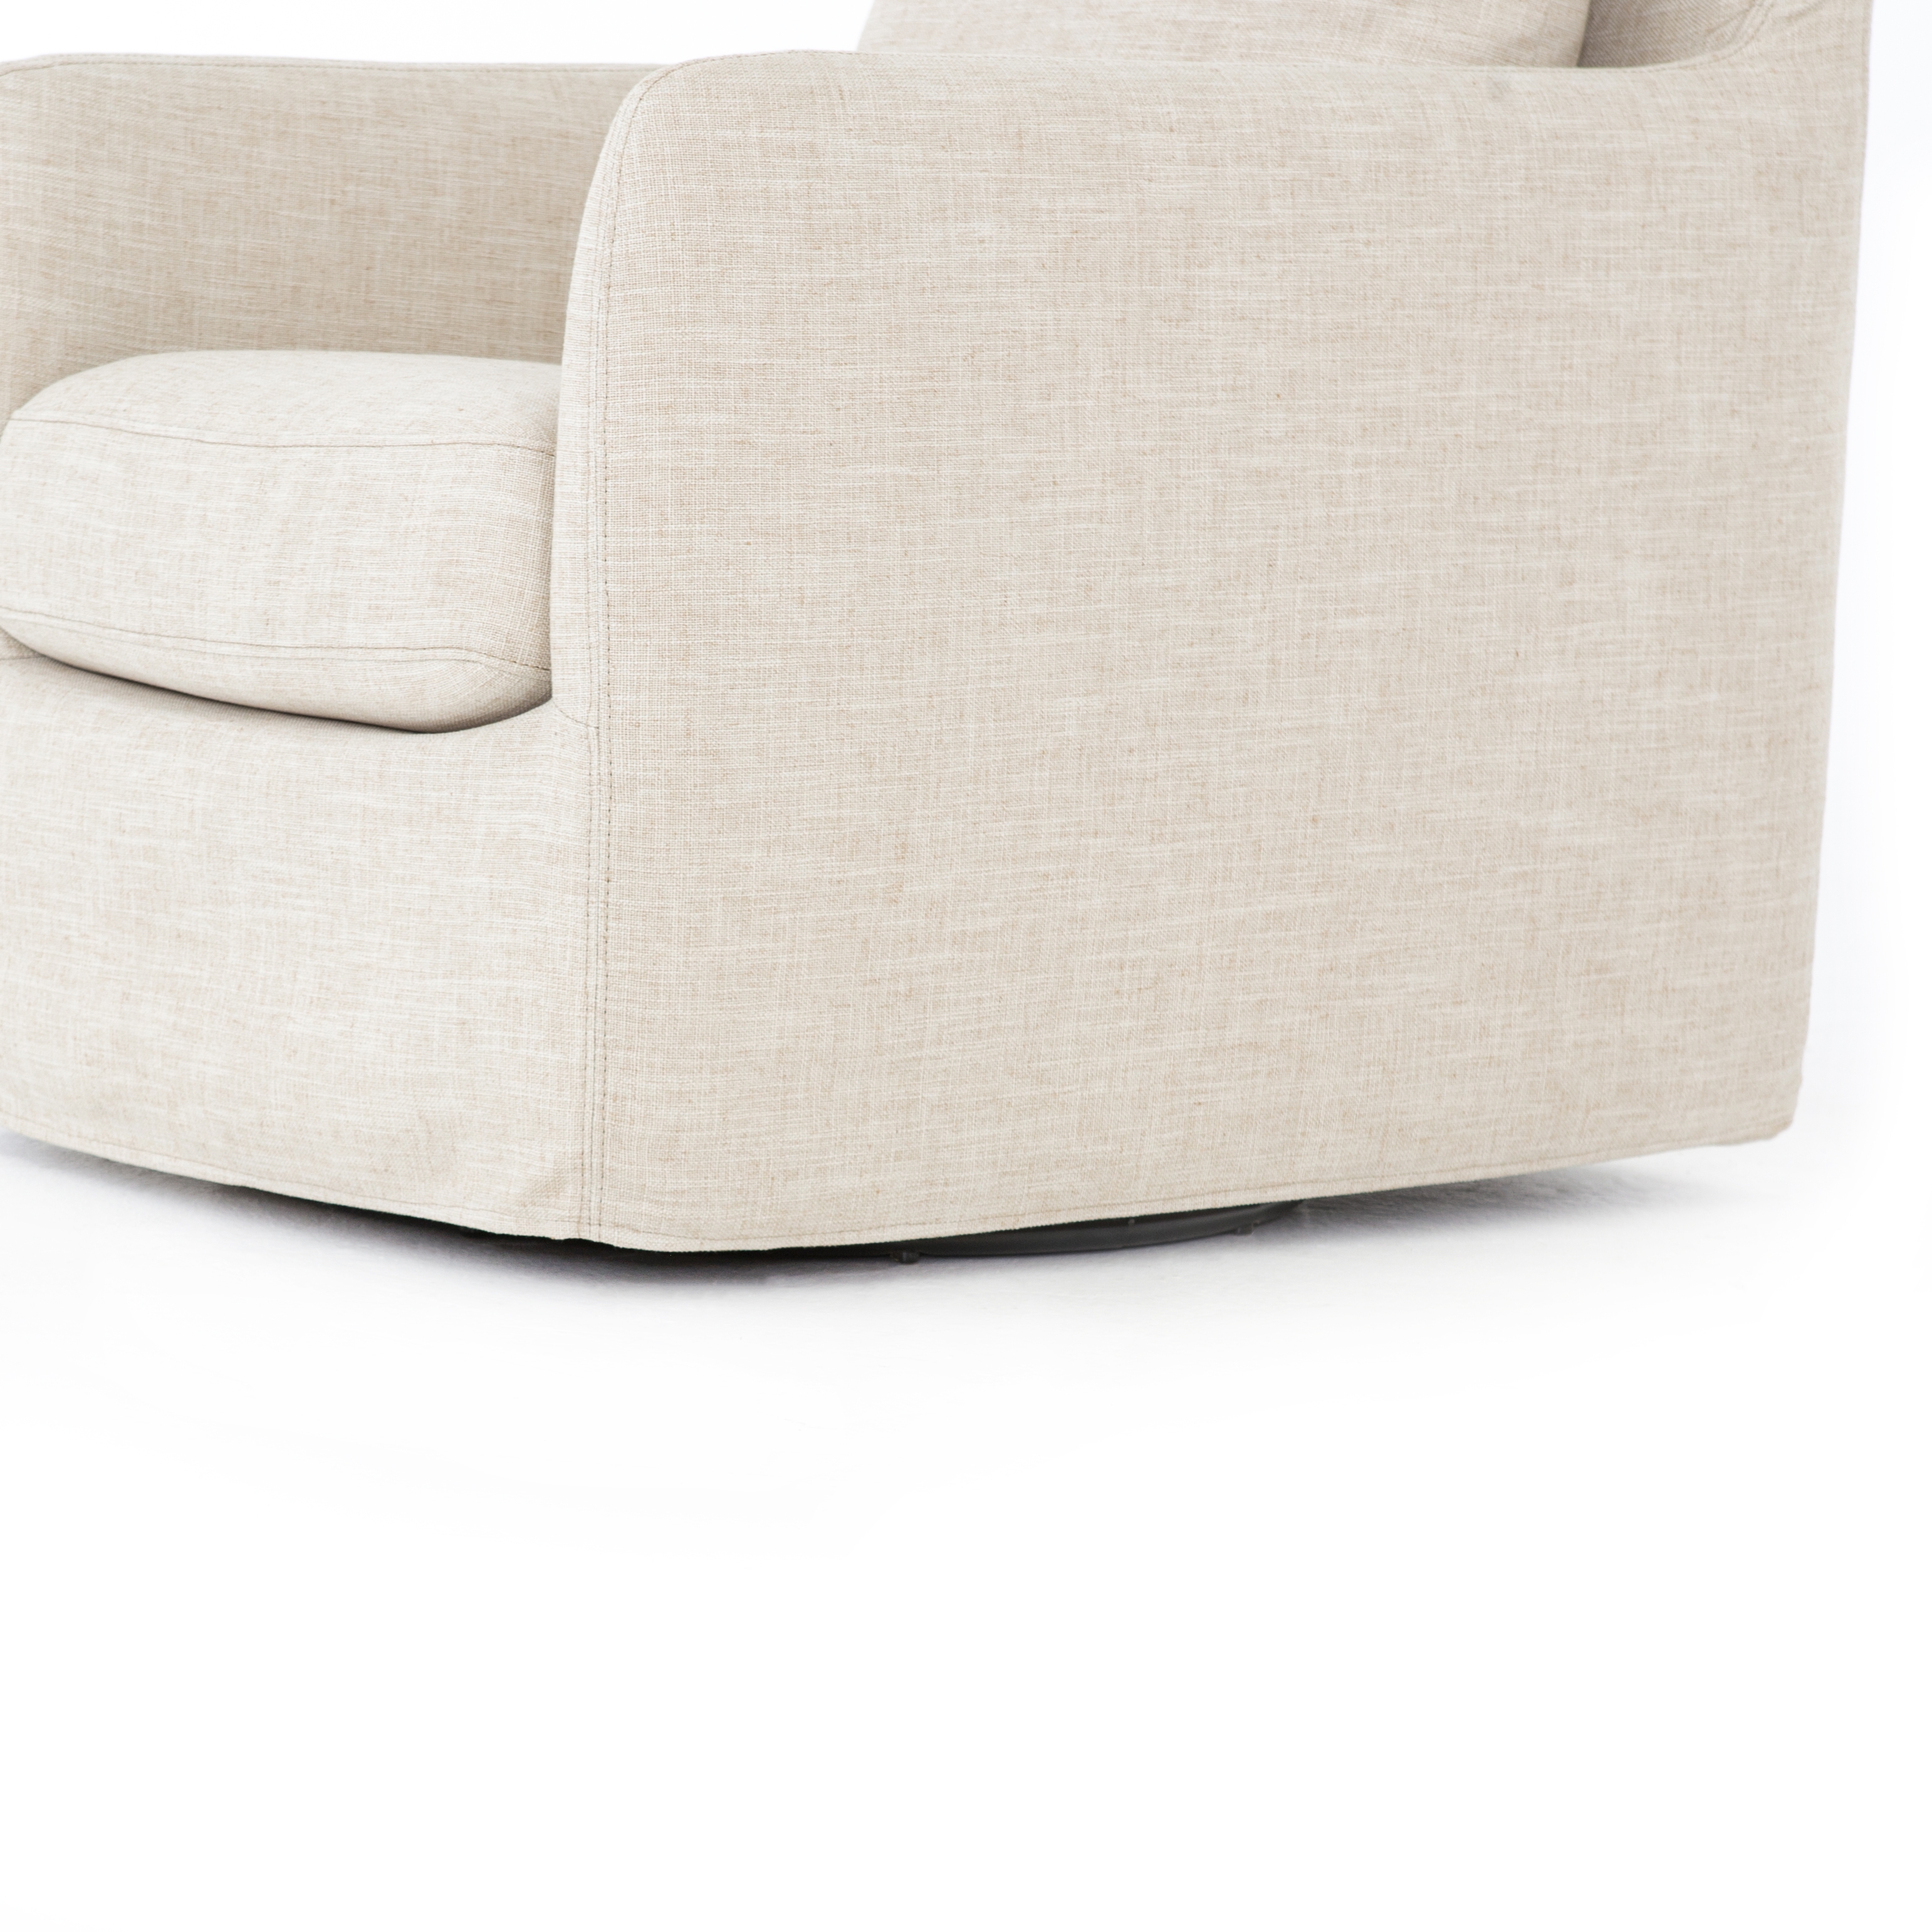 Banks Swivel Chair-Cambric Ivory - Image 3